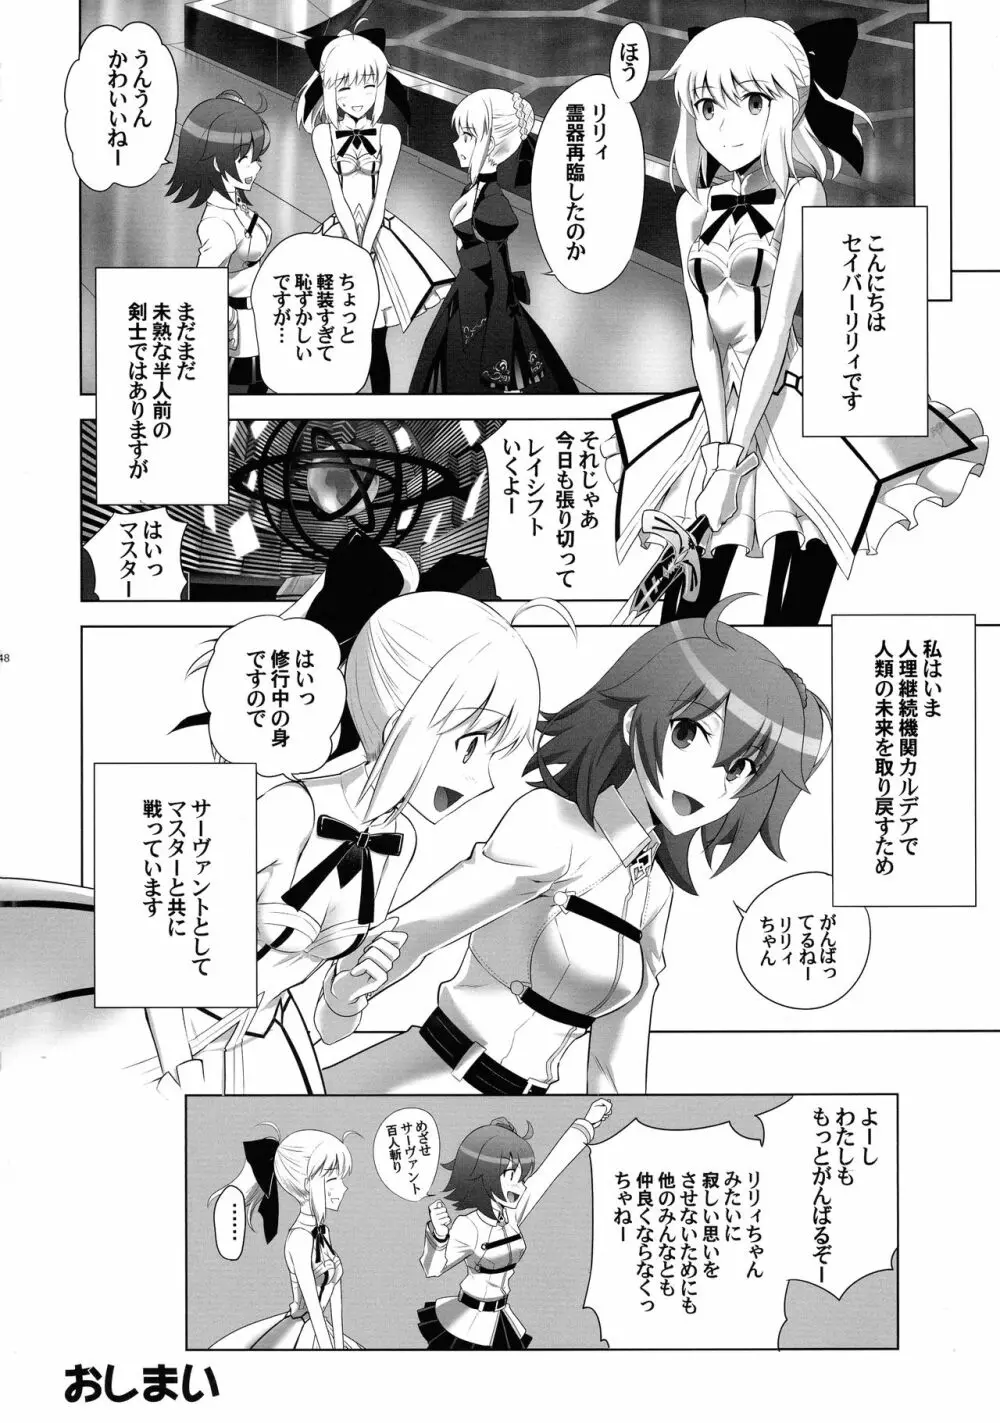 T*MOON COMPLEX R18 総集編 - page47